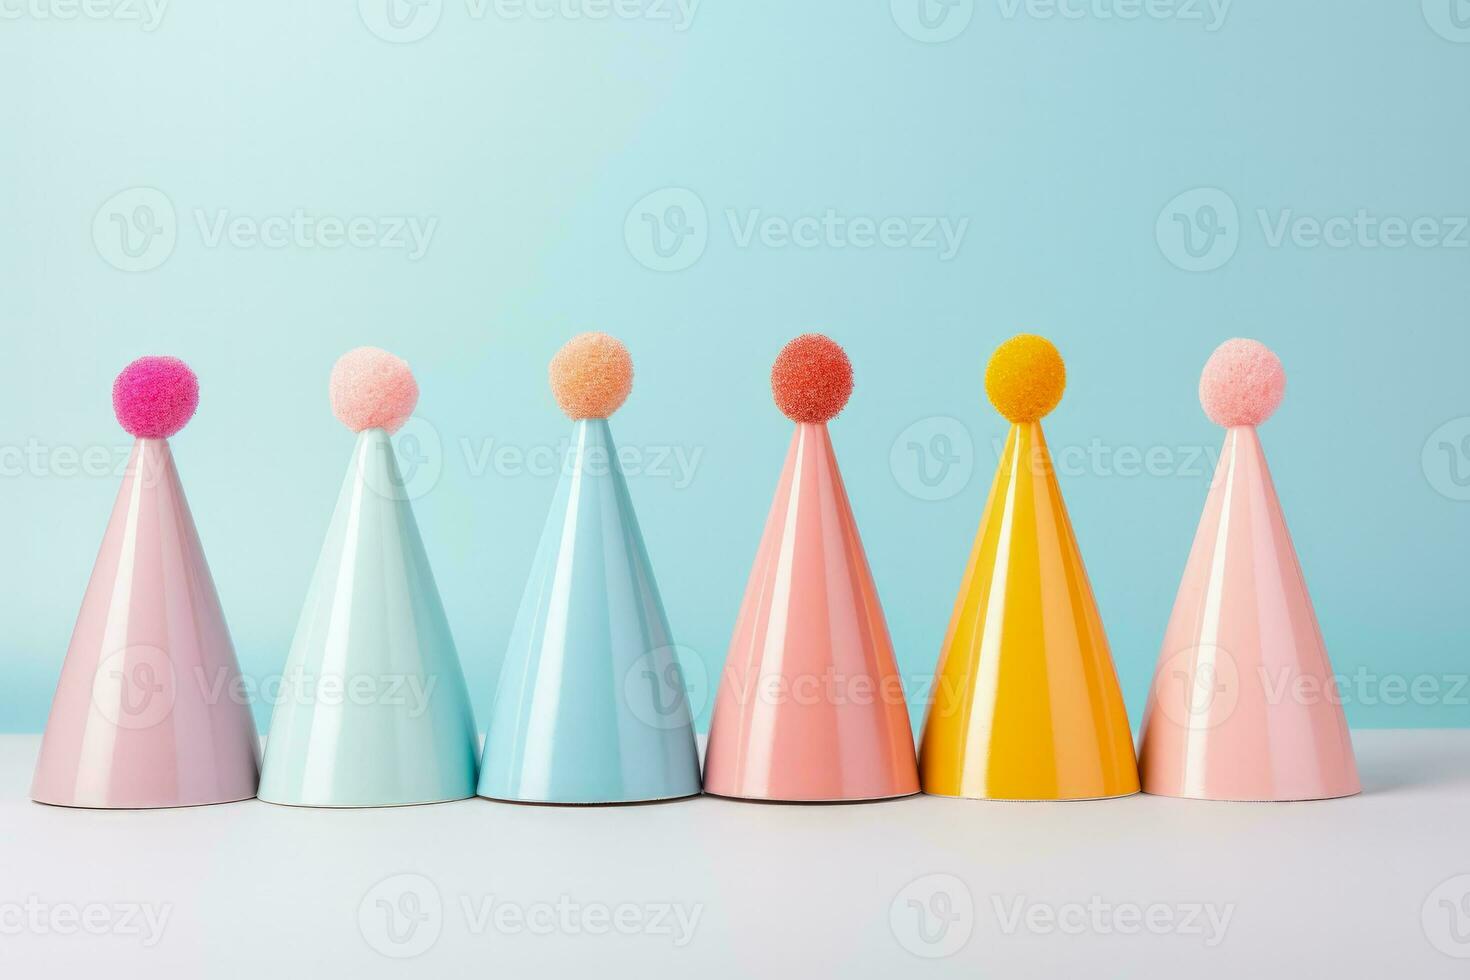 Vibrant party hats in various colors to liven up celebrations photo